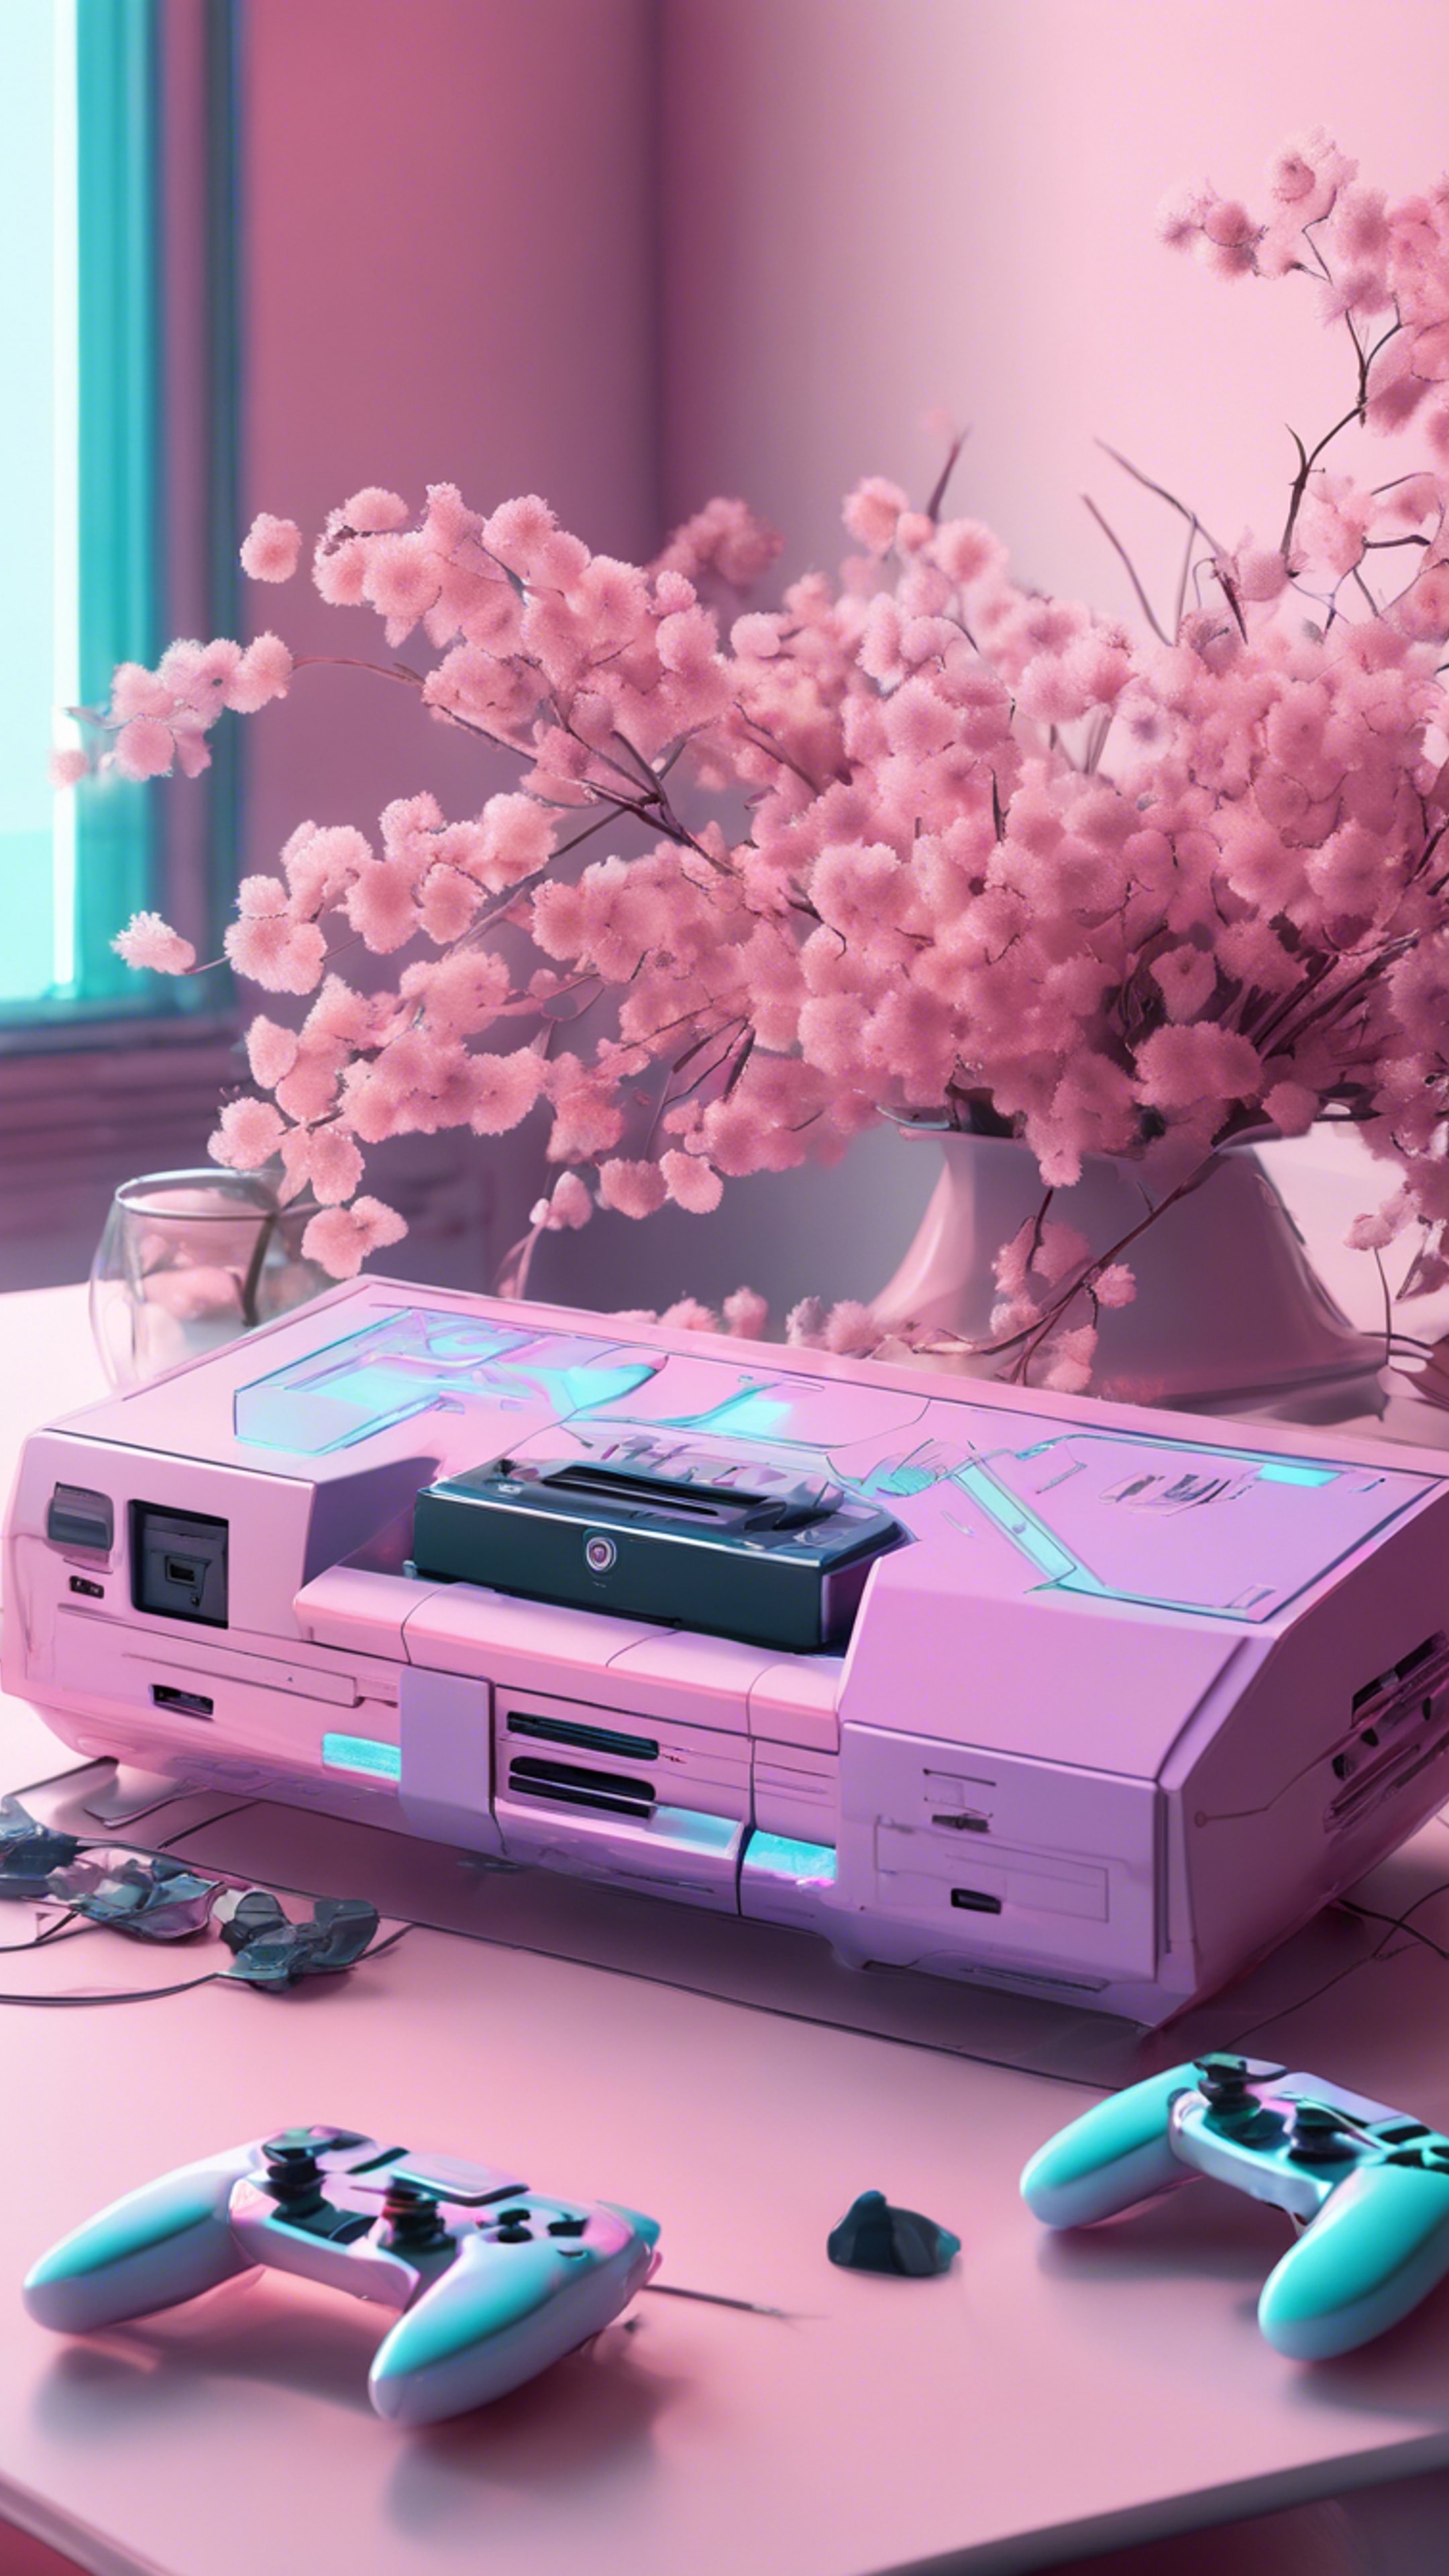 A pastel colored gaming console on a white table next to soft colored flowers in a daylight room. Tapeta na zeď[43bf14bcce304acdbb24]